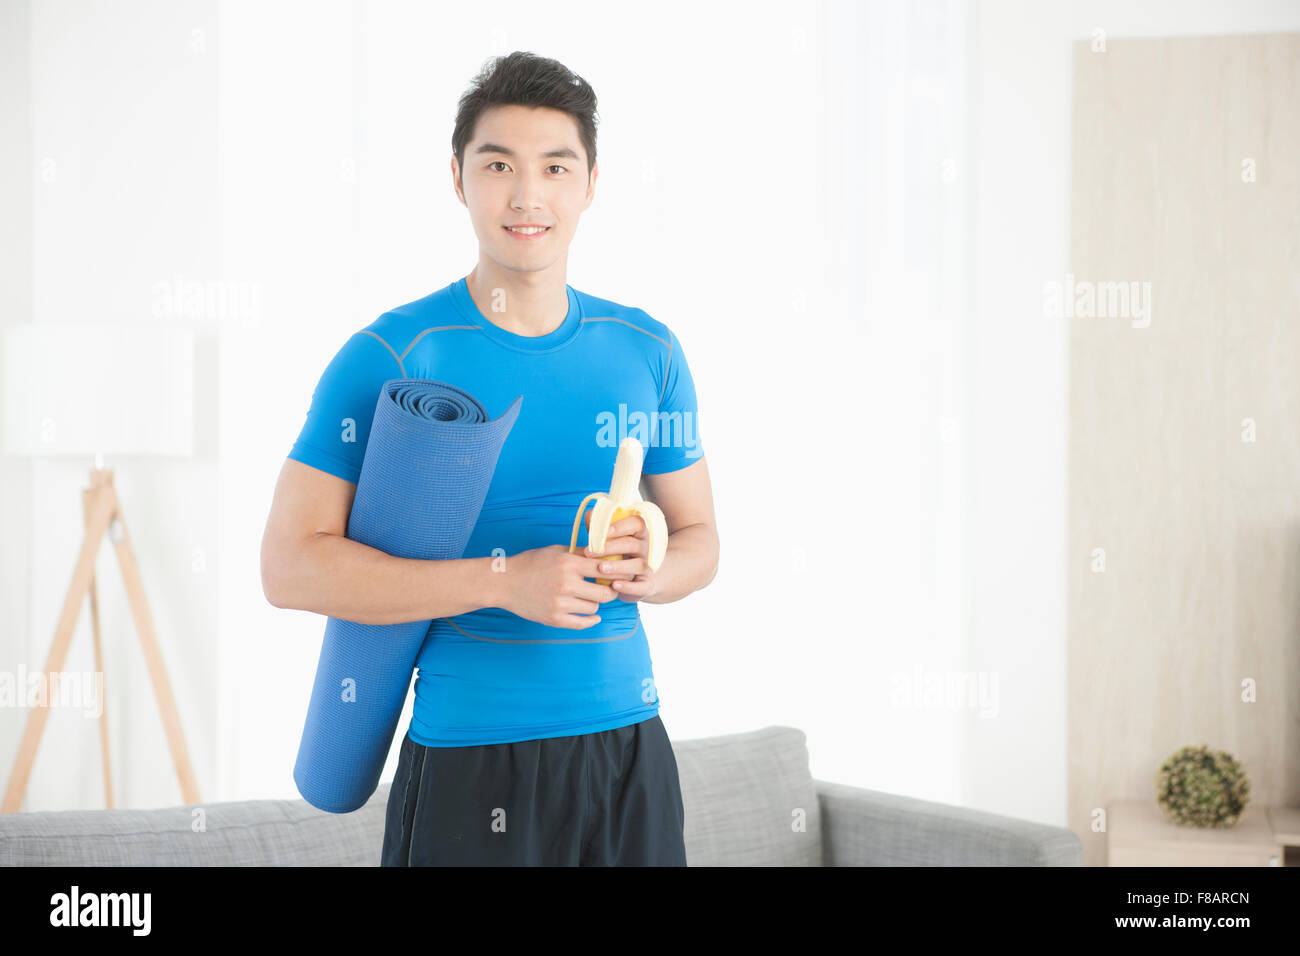 Man holding a mat and banana staring at front in living room Stock Photo